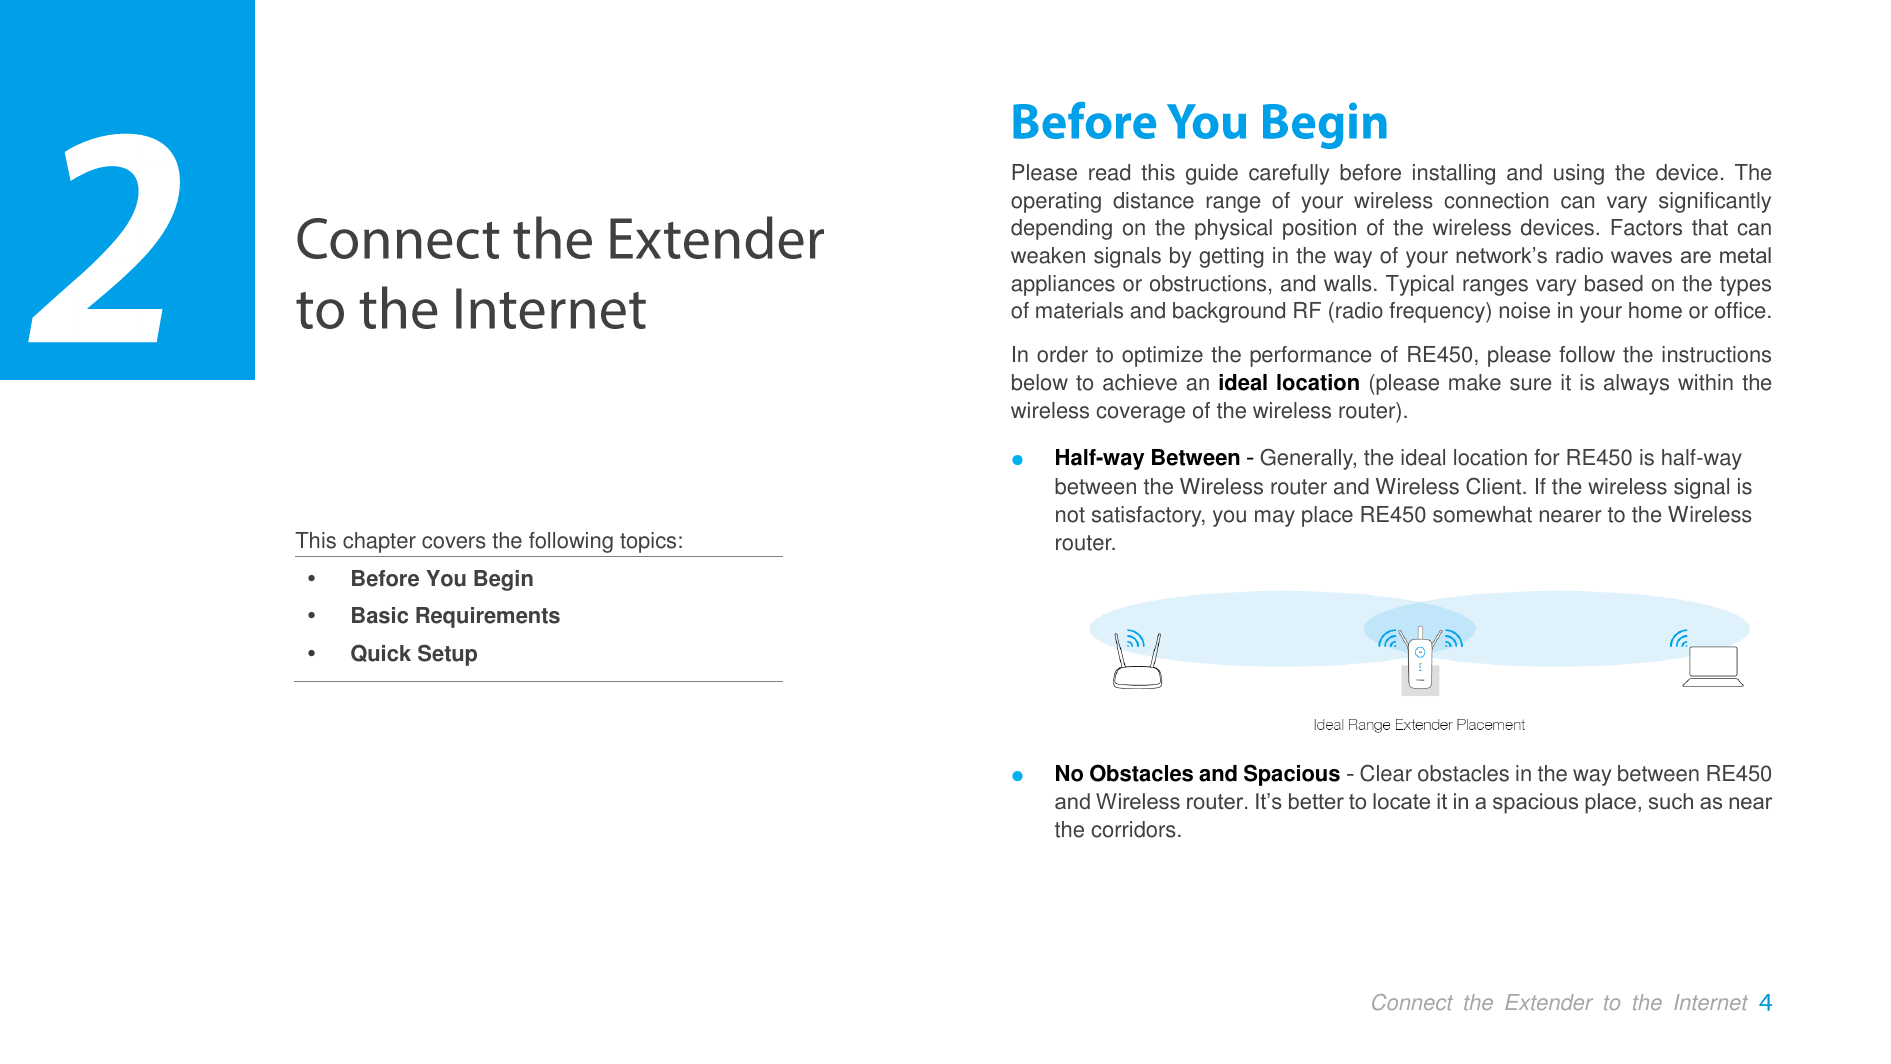  Connect  the  Extender  to  the  Internet     This chapter covers the following topics:  Before You Begin  Basic Requirements  Quick Setup Please  read  this  guide carefully before installing and  using  the  device.  The operating  distance  range  of  your  wireless  connection  can  vary  significantly depending on the physical position of the wireless devices. Factors that can weaken signals by getting in the way of your network’s radio waves are metal appliances or obstructions, and walls. Typical ranges vary based on the types of materials and background RF (radio frequency) noise in your home or office. In order to optimize the performance of RE450, please follow the instructions below to achieve an ideal location (please make sure it is always within the wireless coverage of the wireless router). ● Half-way Between  Generally, the ideal location for RE450 is half-way between the Wireless router and Wireless Client. If the wireless signal is not satisfactory, you may place RE450 somewhat nearer to the Wireless router.  ● No Obstacles and Spacious - Clear obstacles in the way between RE450 and Wireless router. It’s better to locate it in a spacious place, such as near the corridors.    